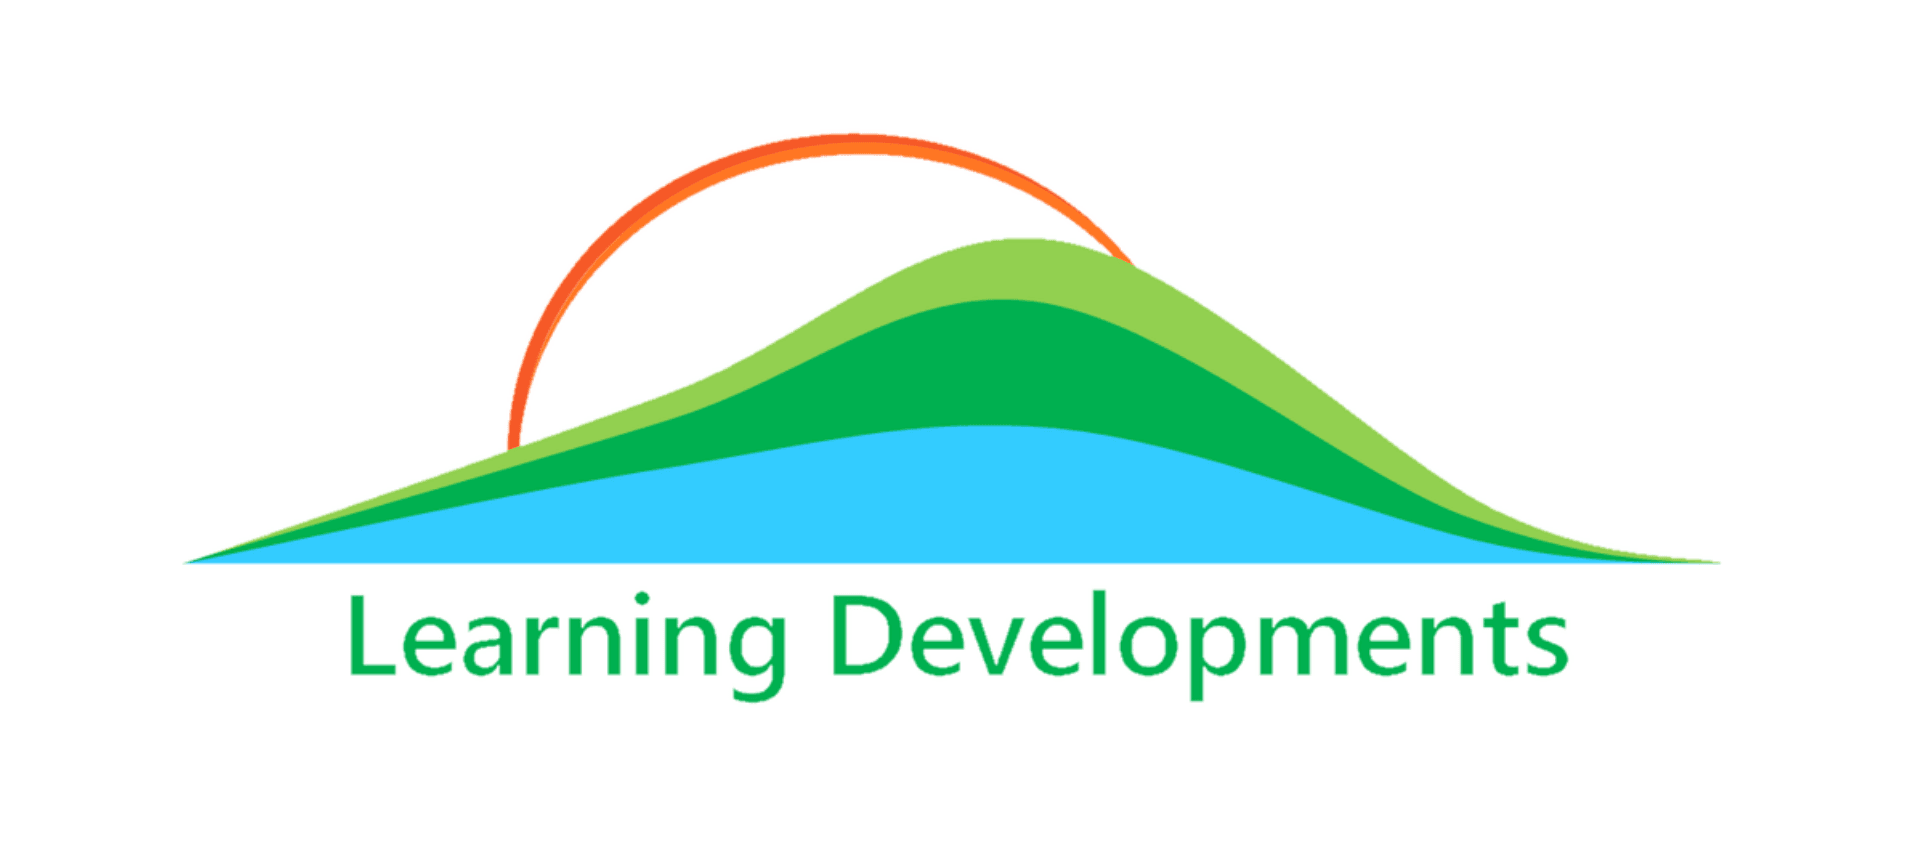 Welcome to Learning Developments